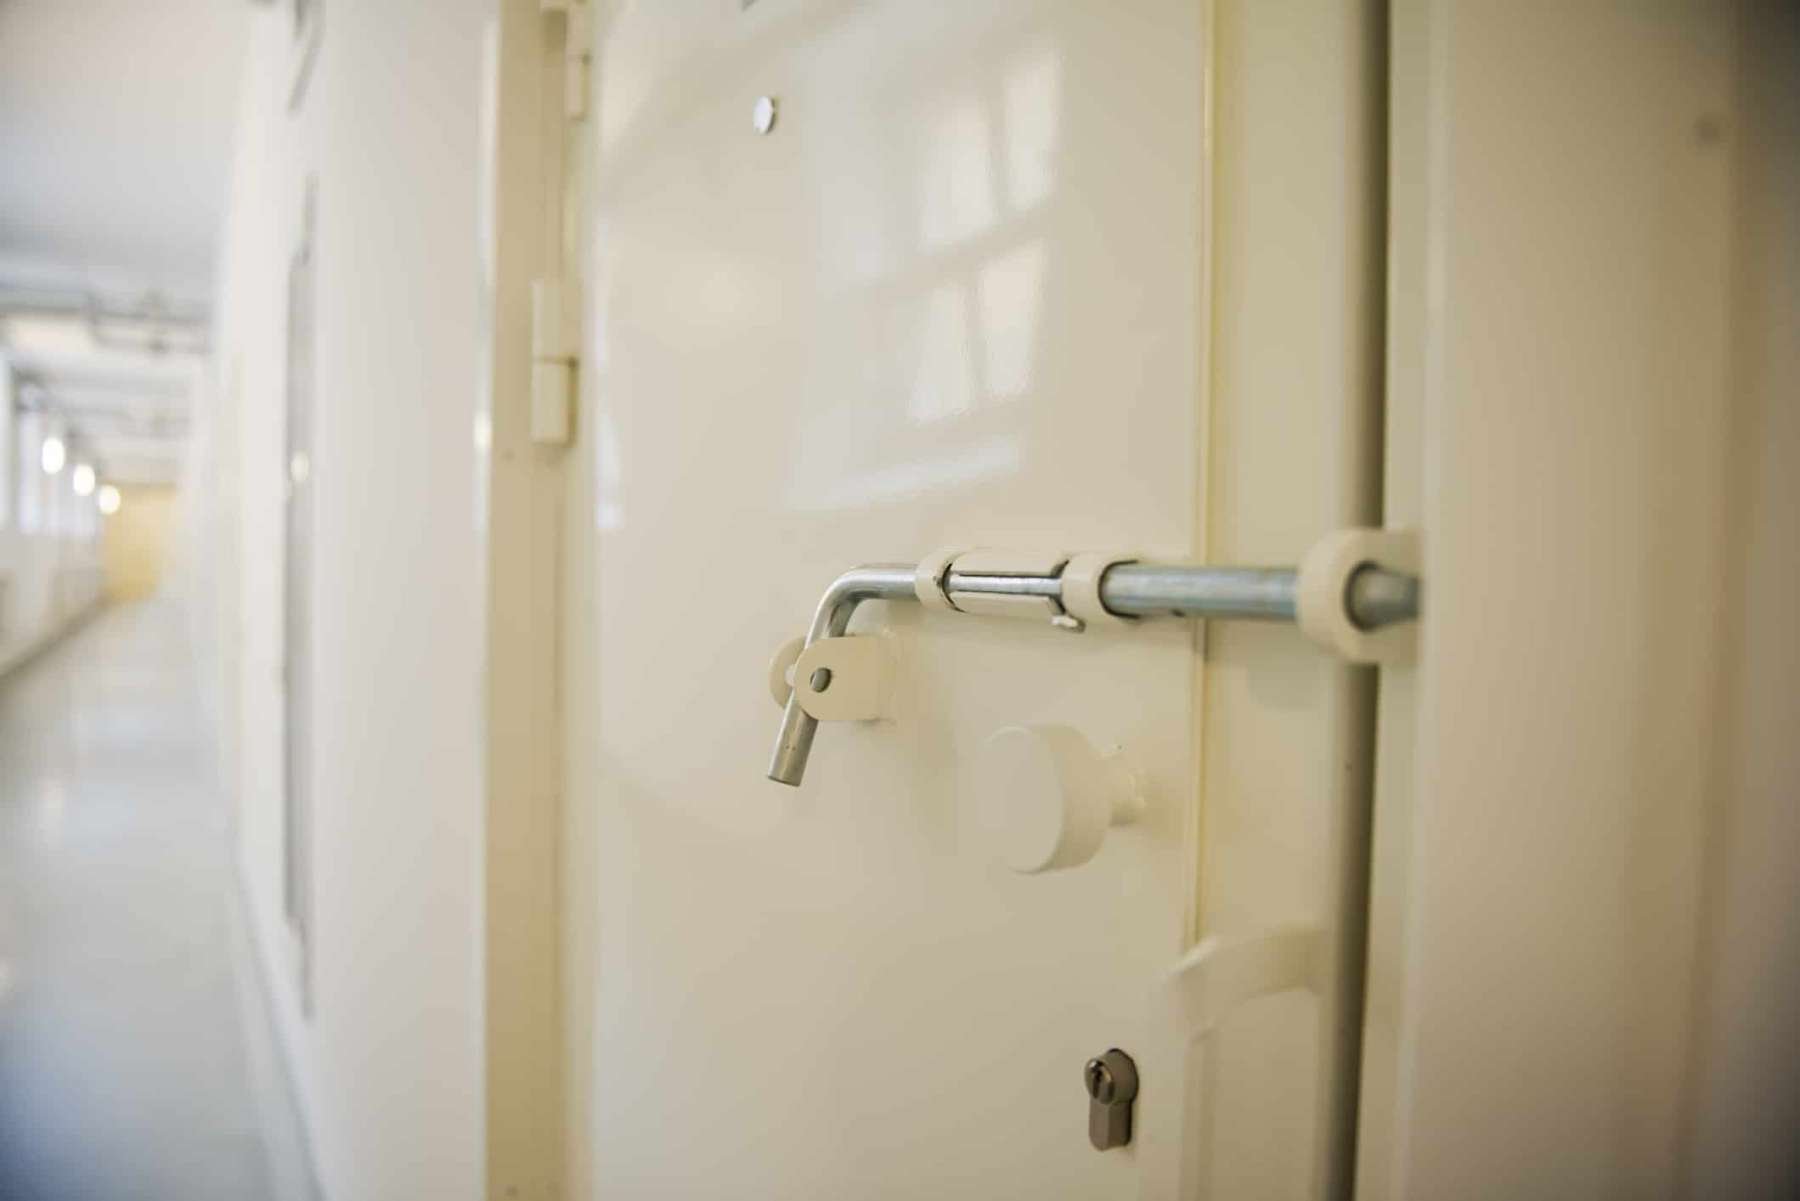 Rhode Island News: Solitary Confinement Tragedies Expose Flaws in Rhode Island’s Prison System